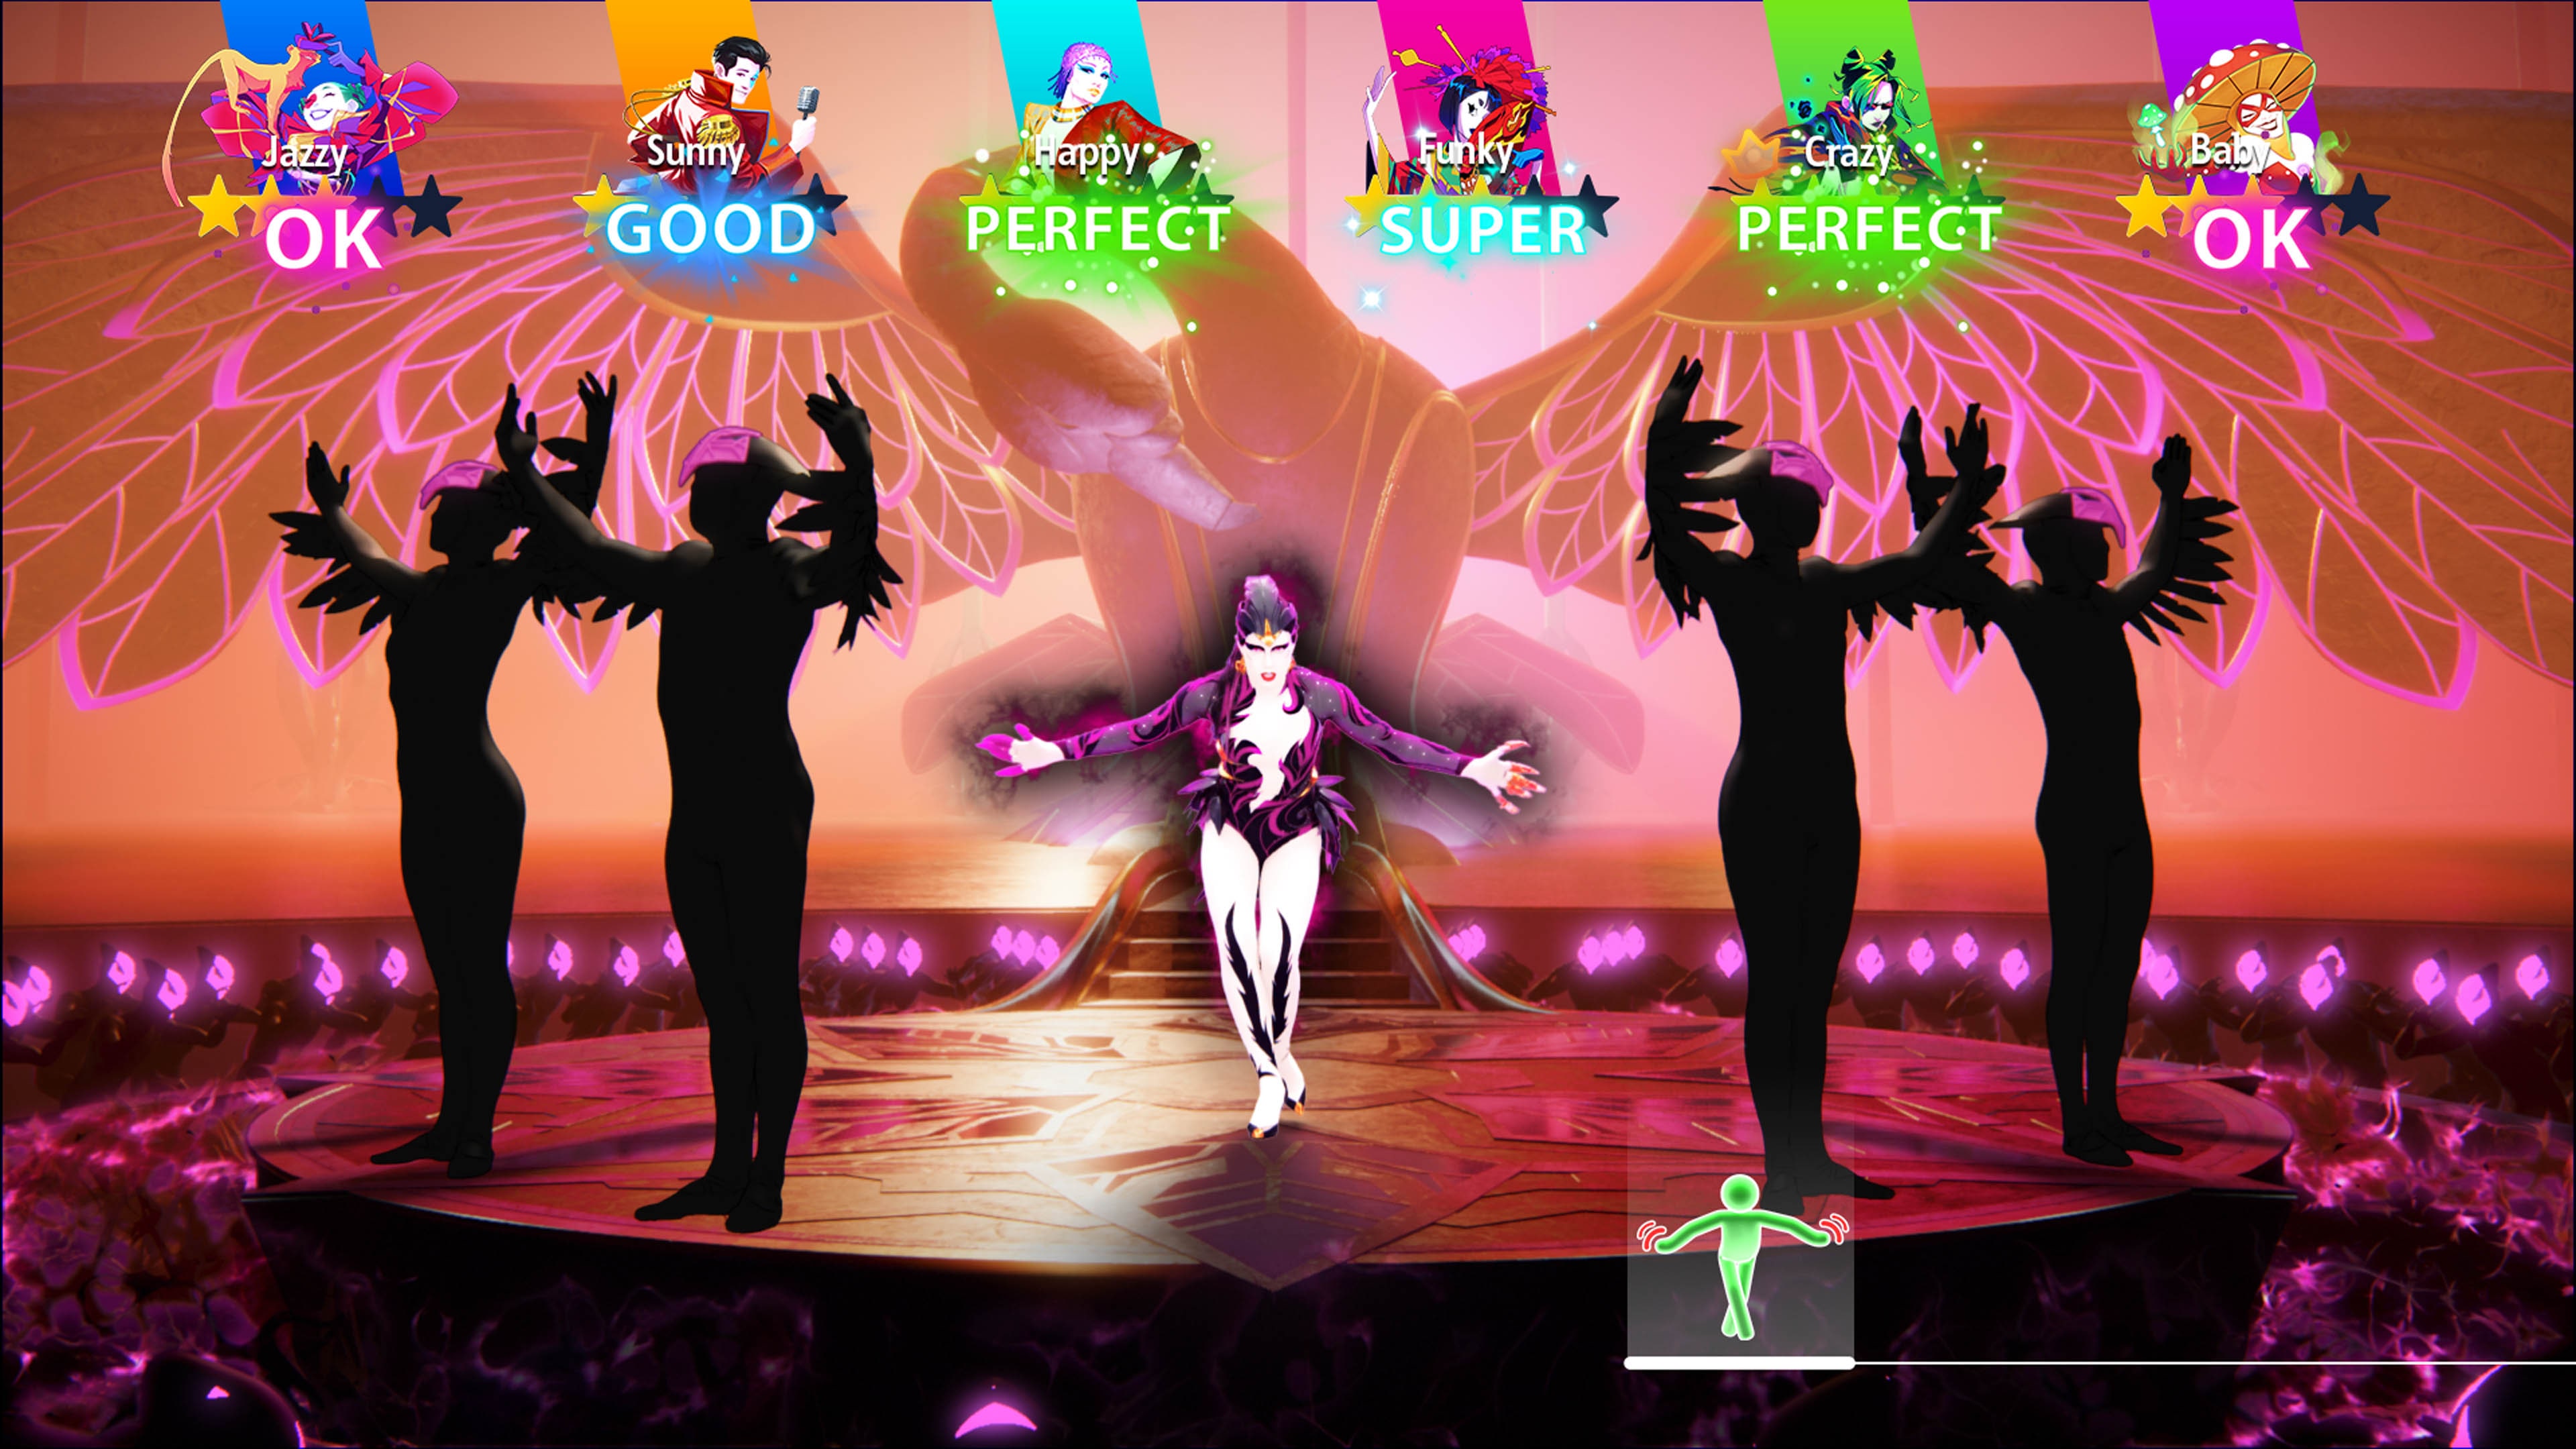 Just Dance 2022 Ultimate Edition PS5 on PS5 — price history, screenshots,  discounts • USA